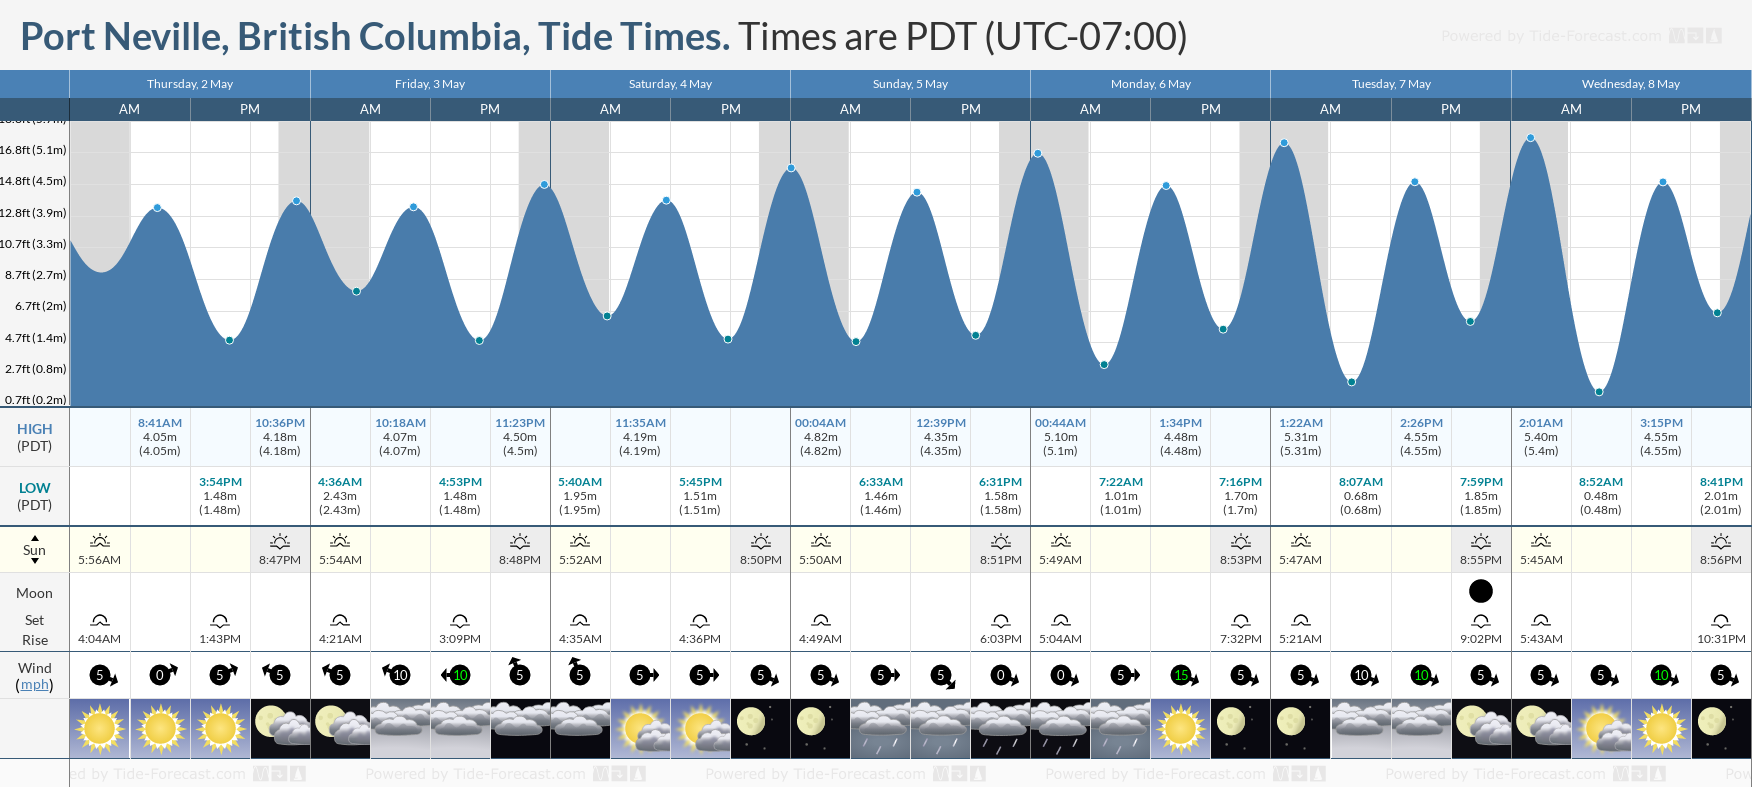 Port Neville, British Columbia Tide Chart including high and low tide tide times for the next 7 days